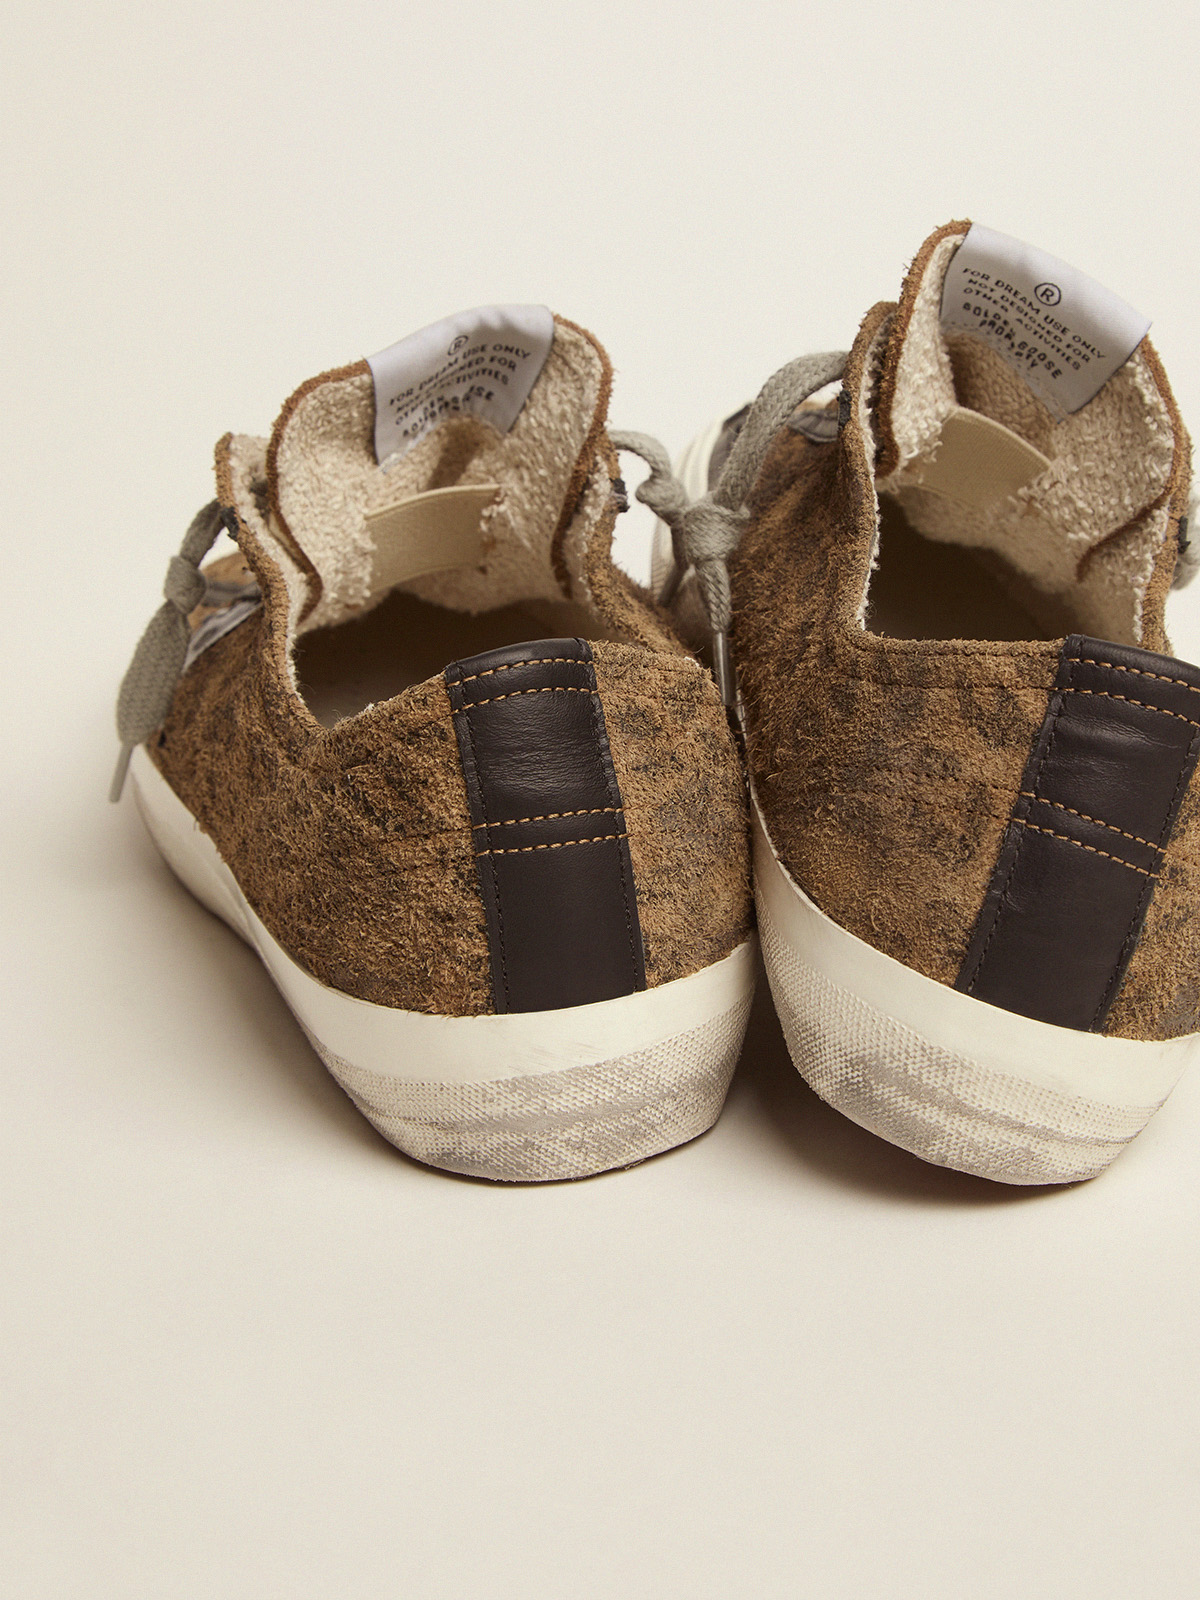 V-star LTD sneakers in leopard-print suede with a black laminated leather  star | Golden Goose